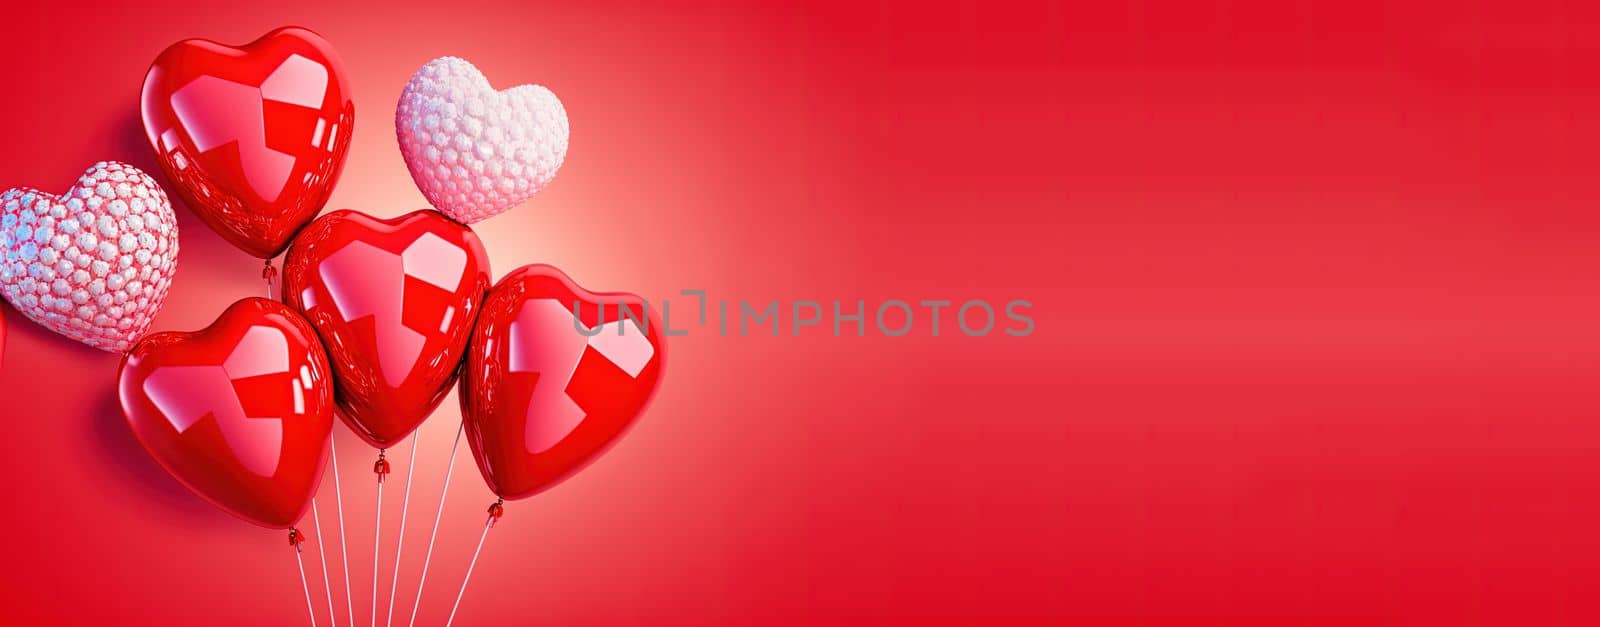 Valentine's Day banner background with a shining red 3D heart